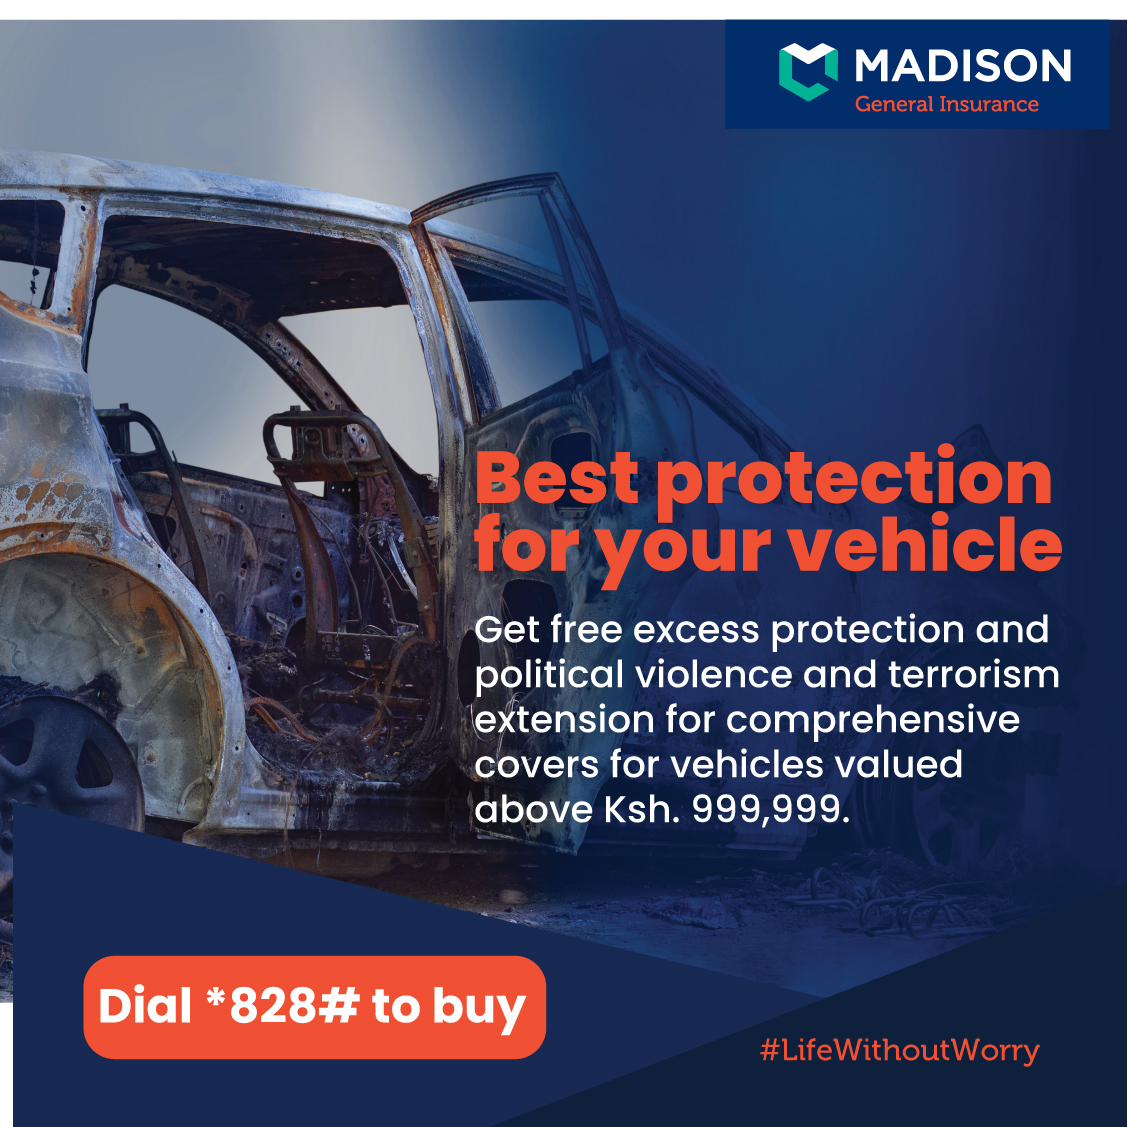 Don't hit the road without motor insurance! Stay protected and worry-free wherever you go. 
Dial *828# today to get protected.
#lifewithoutworry #motorinsurance #drivesafe #drivewithoutworry